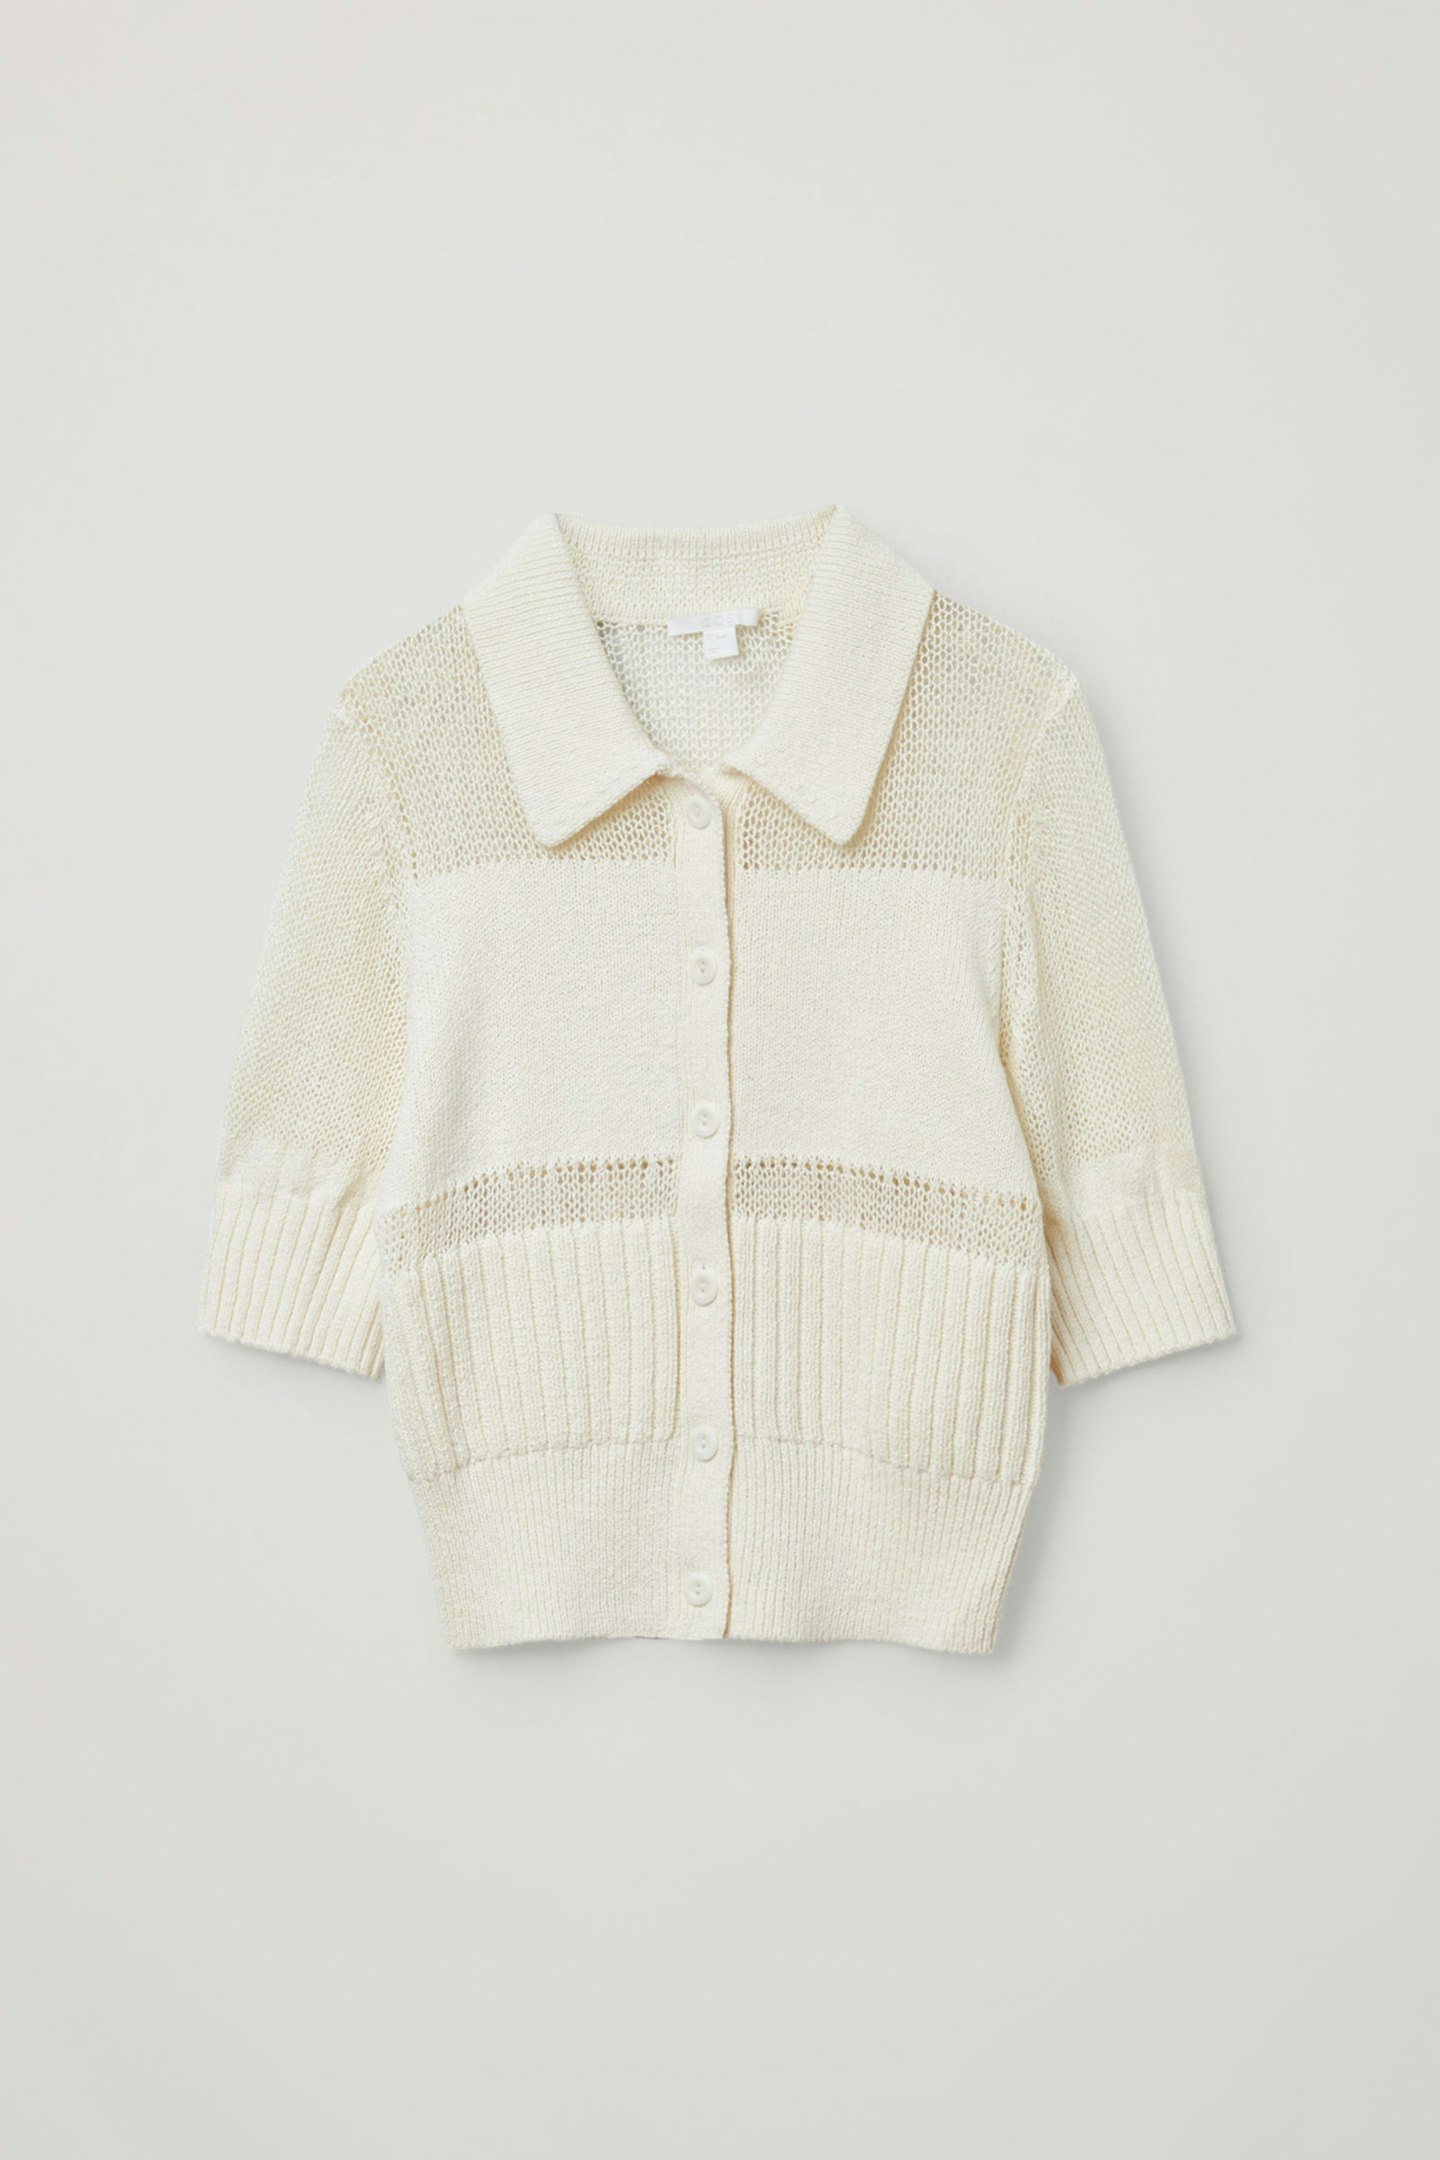 The Collar Cardi – COS, Organic Cotton Mesh Panel Knitted Top, £59